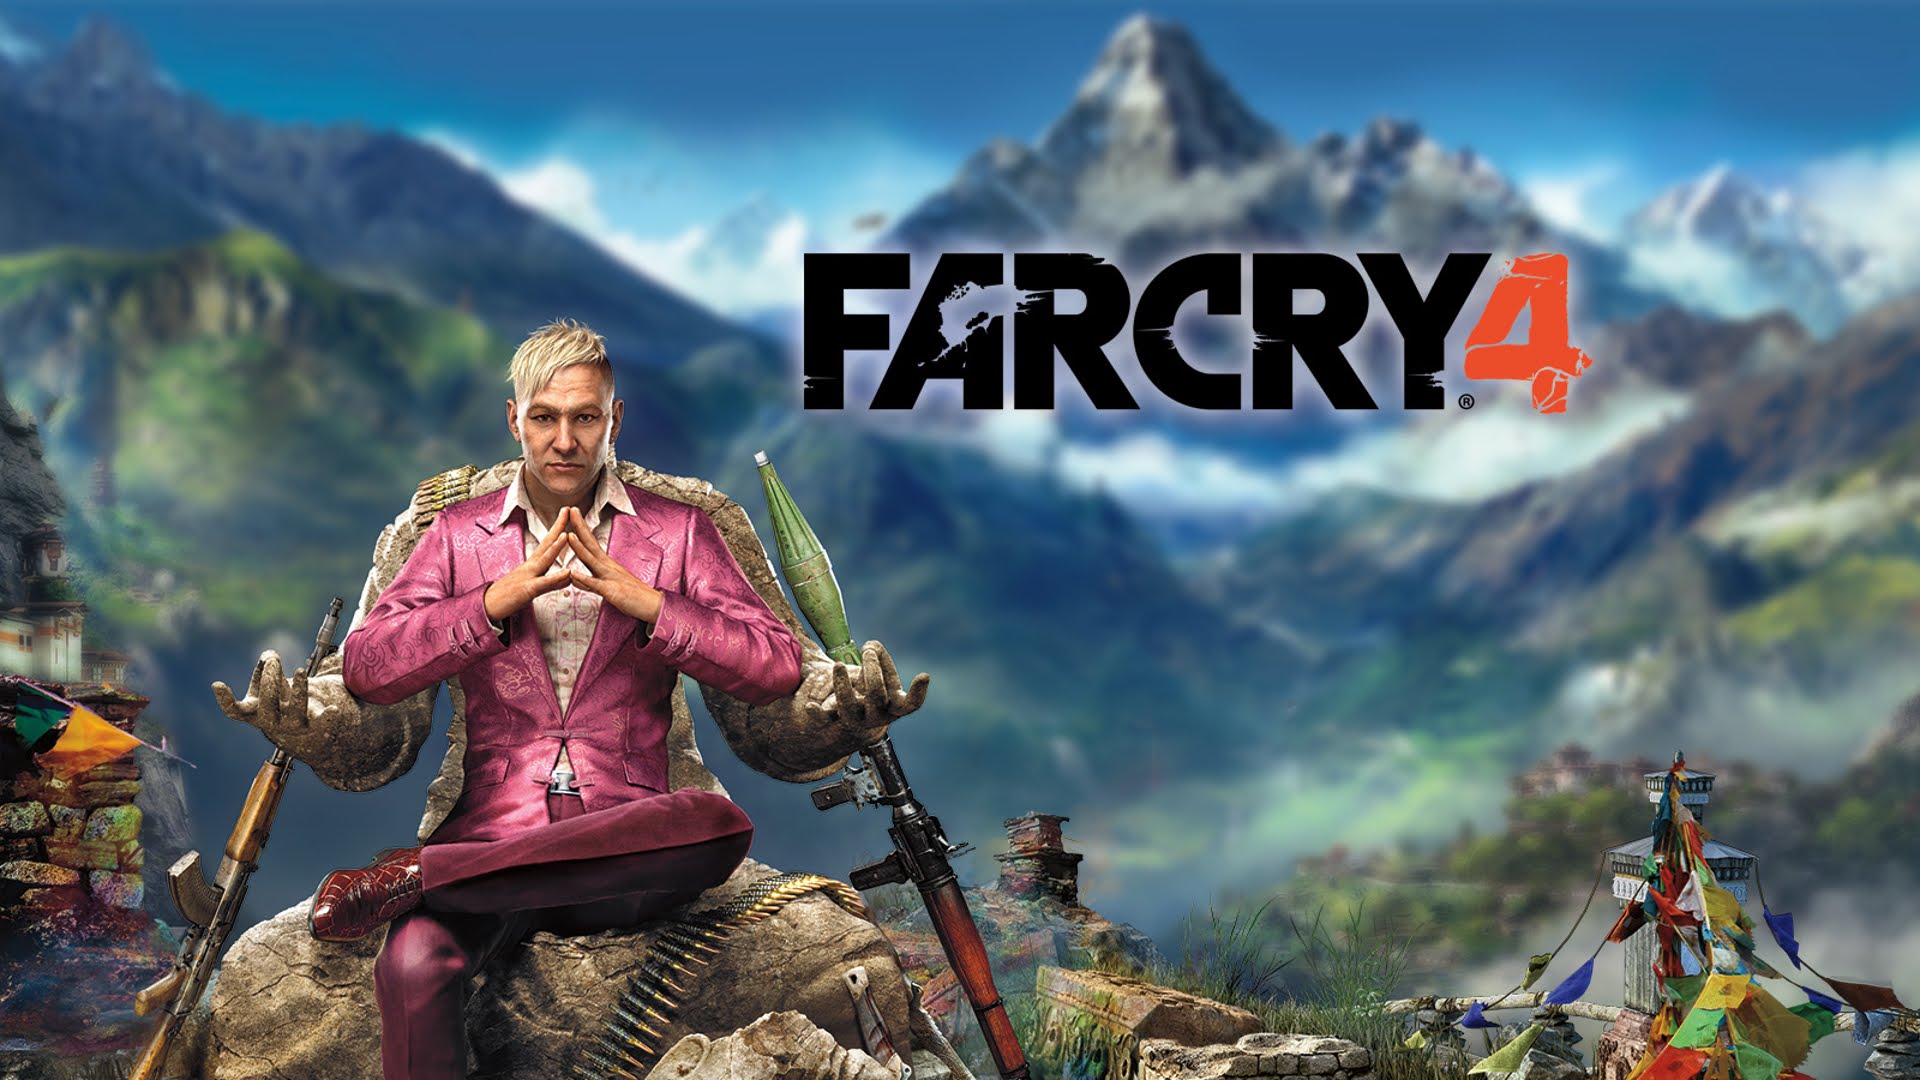 far cry 1 pc game torrent download